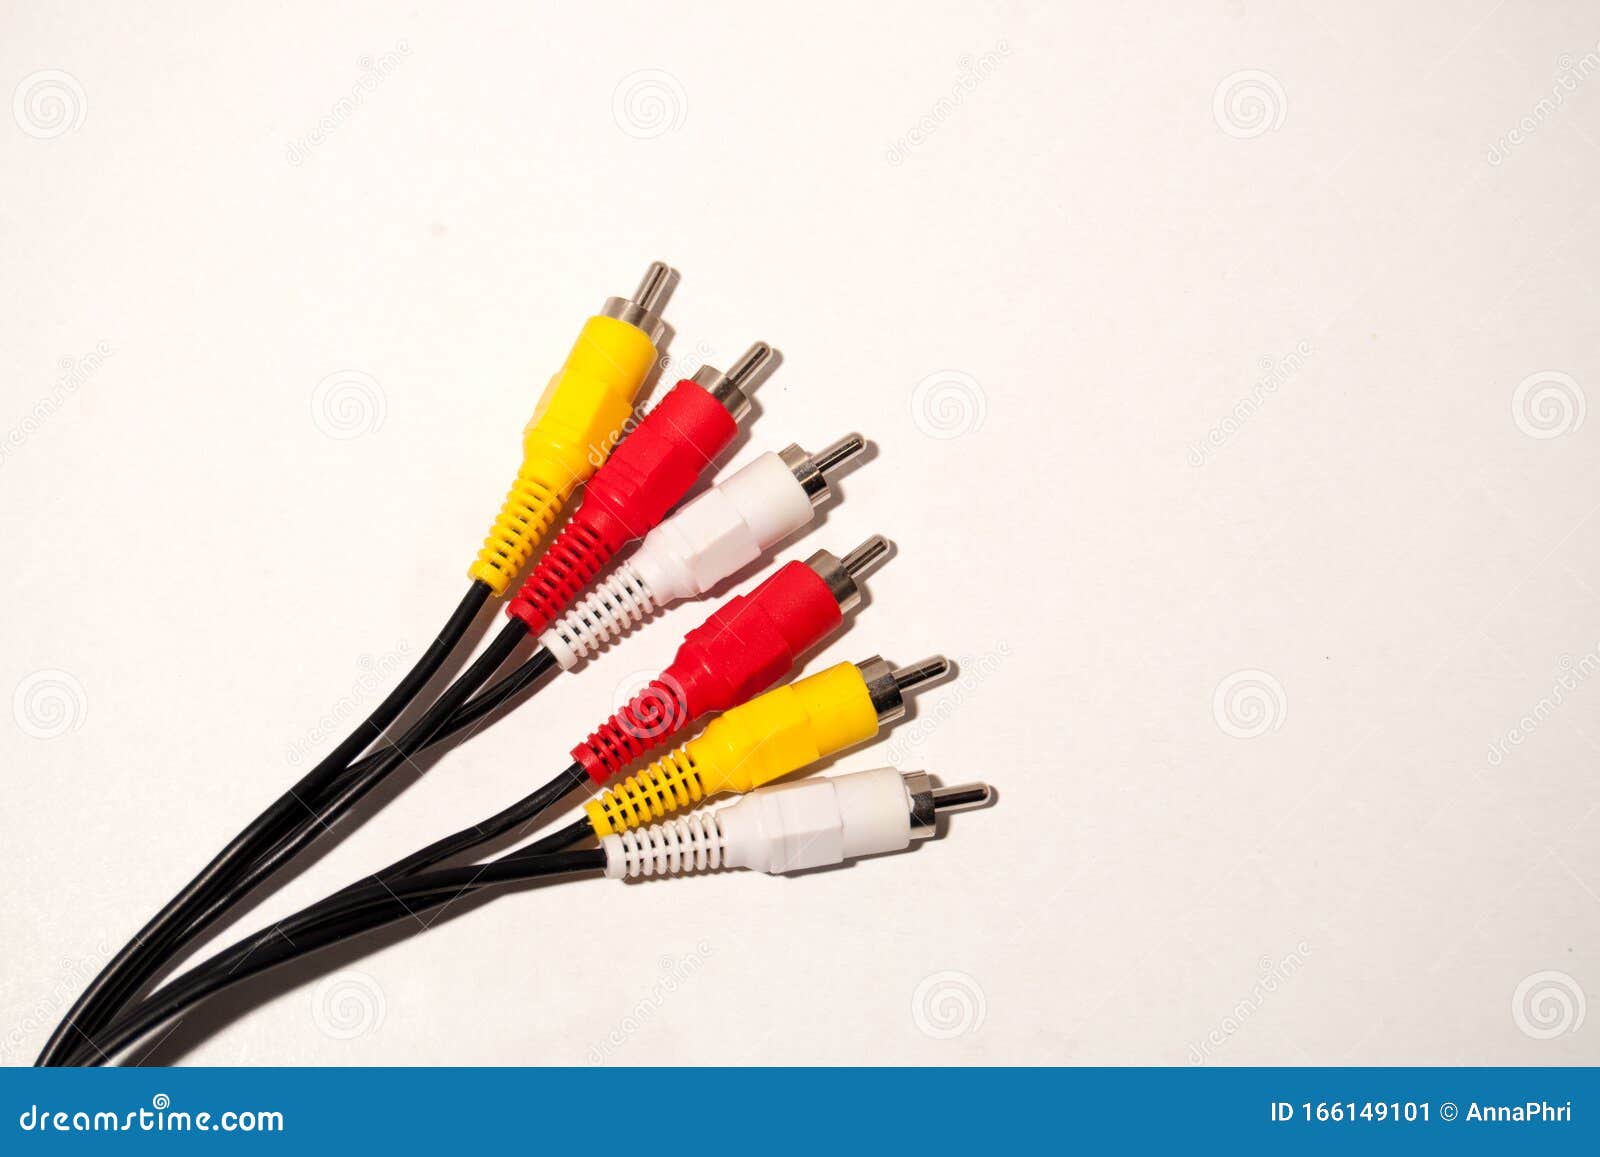 Red Yellow and White Audio Video Cable RCA Jack Image - Image of digital, 166149101